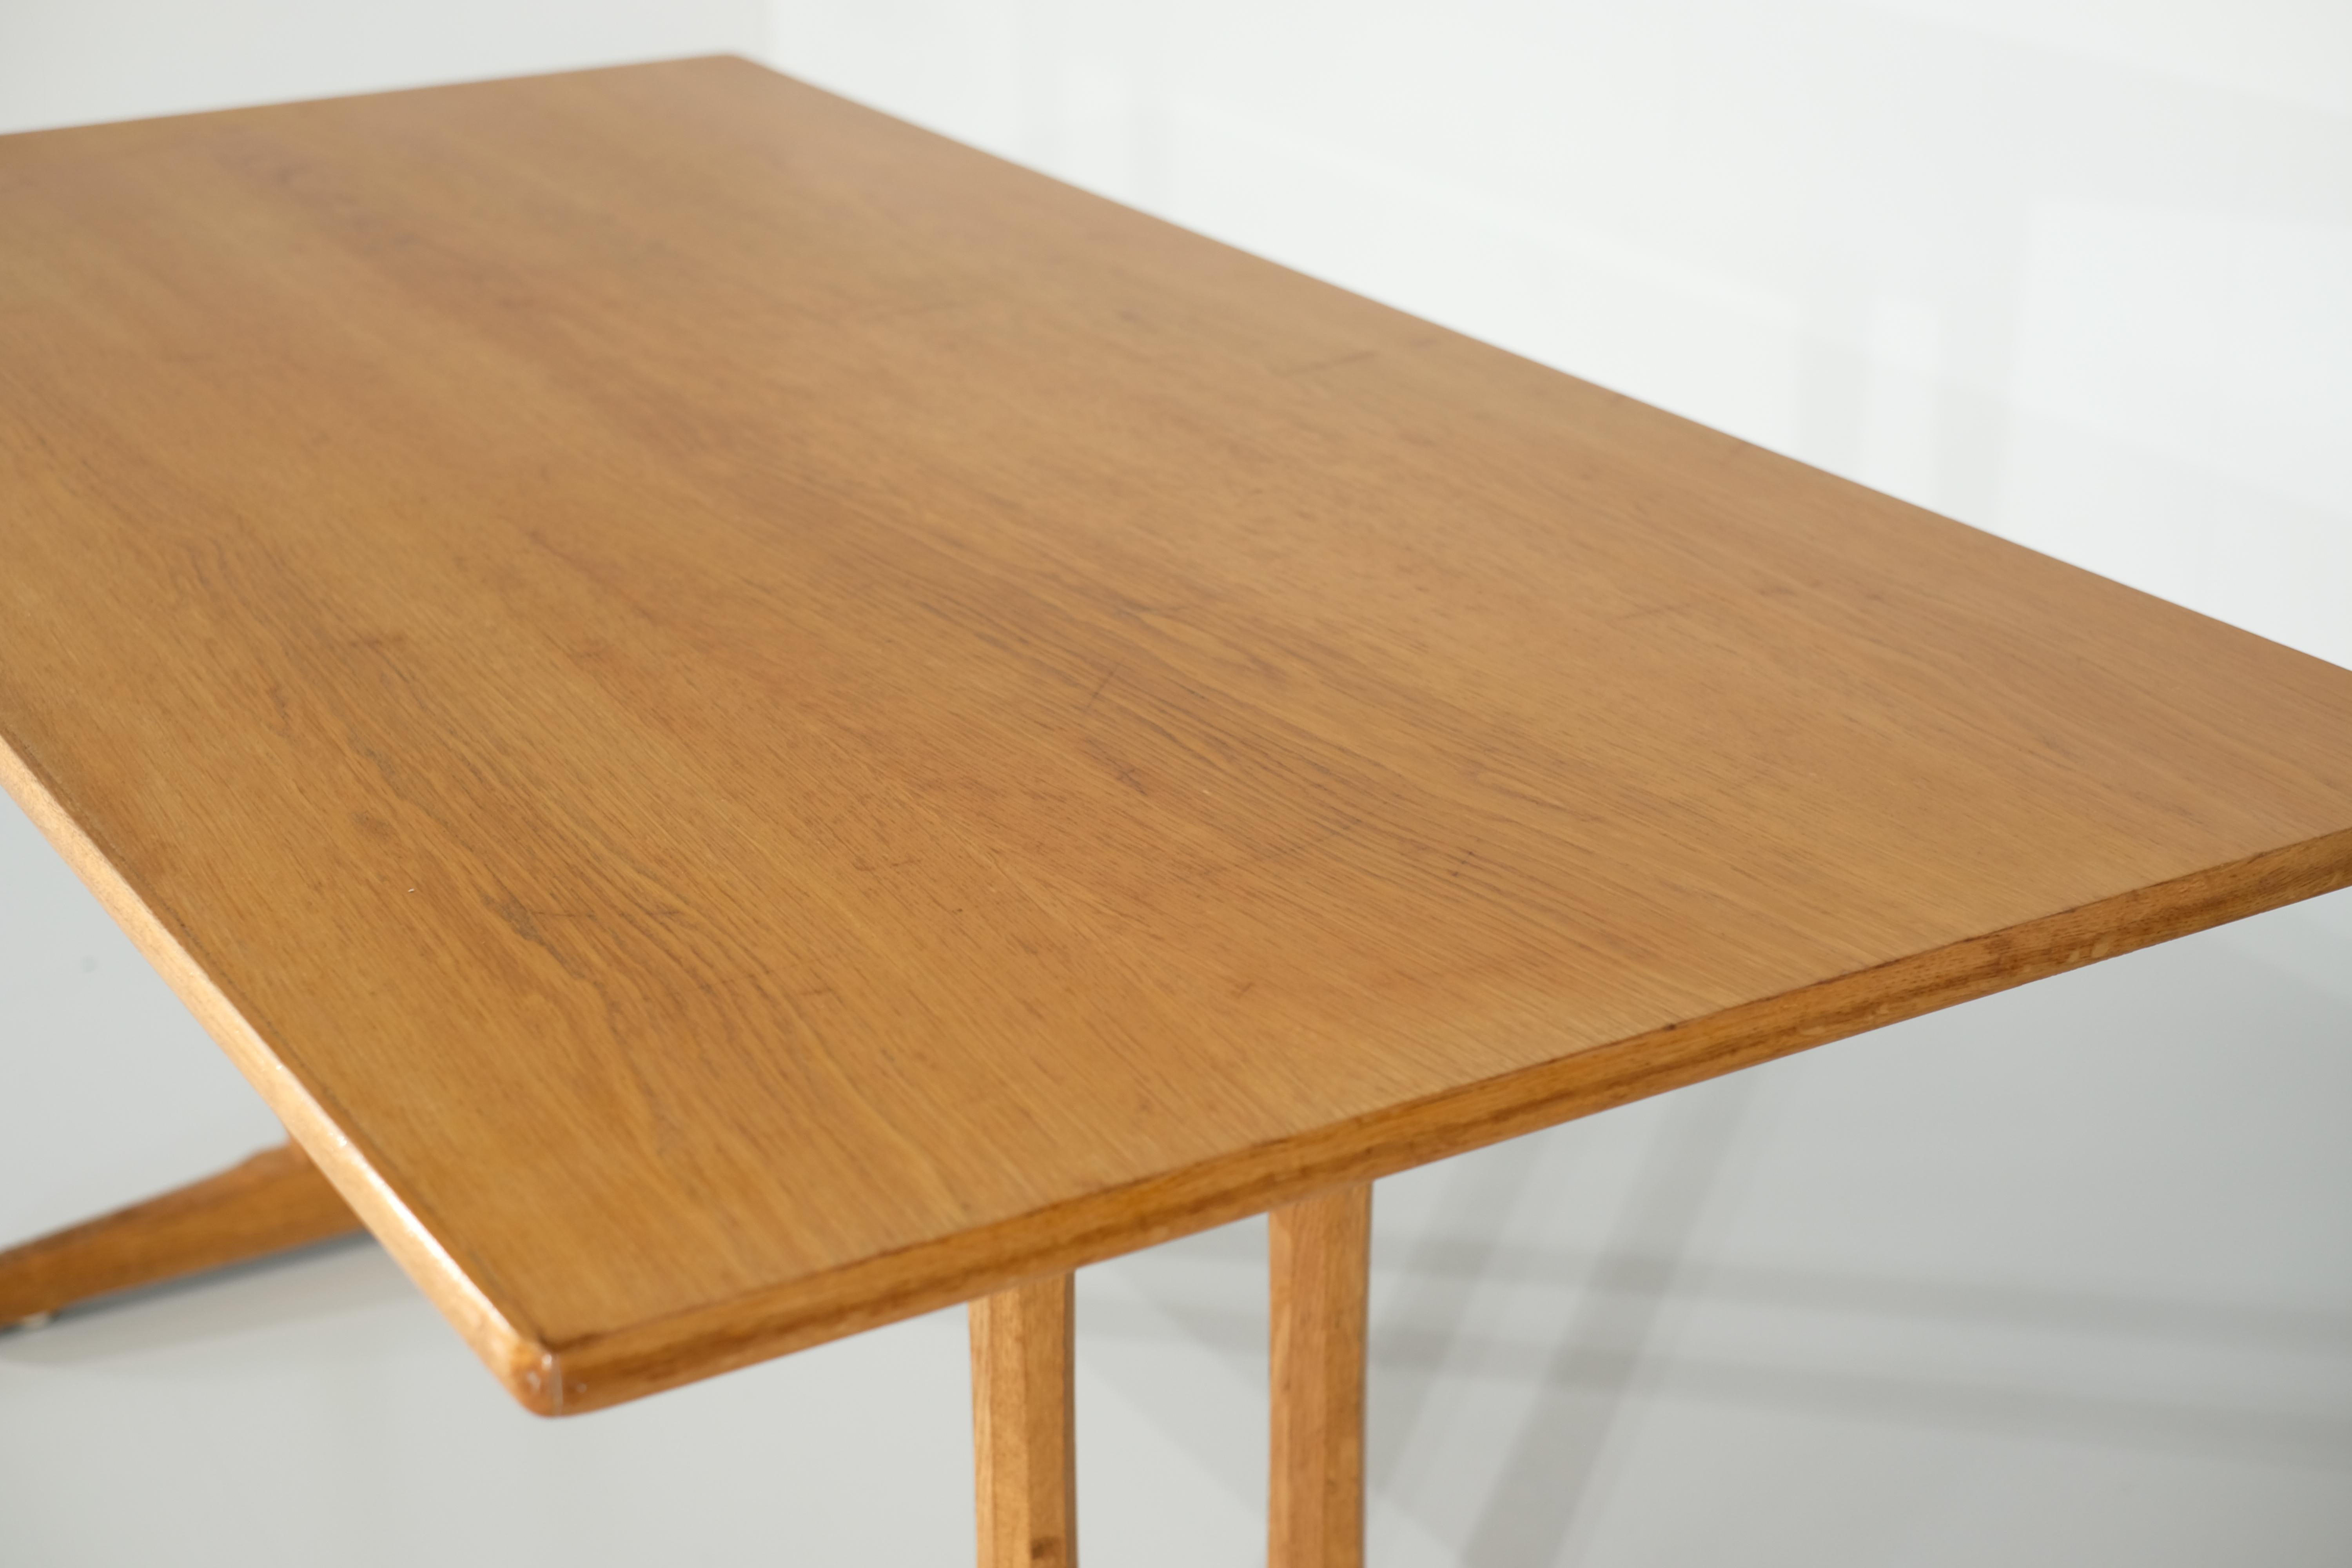 Wood C18 Shaker table by Borge Mogensen for FDB Mobler - 1950s For Sale